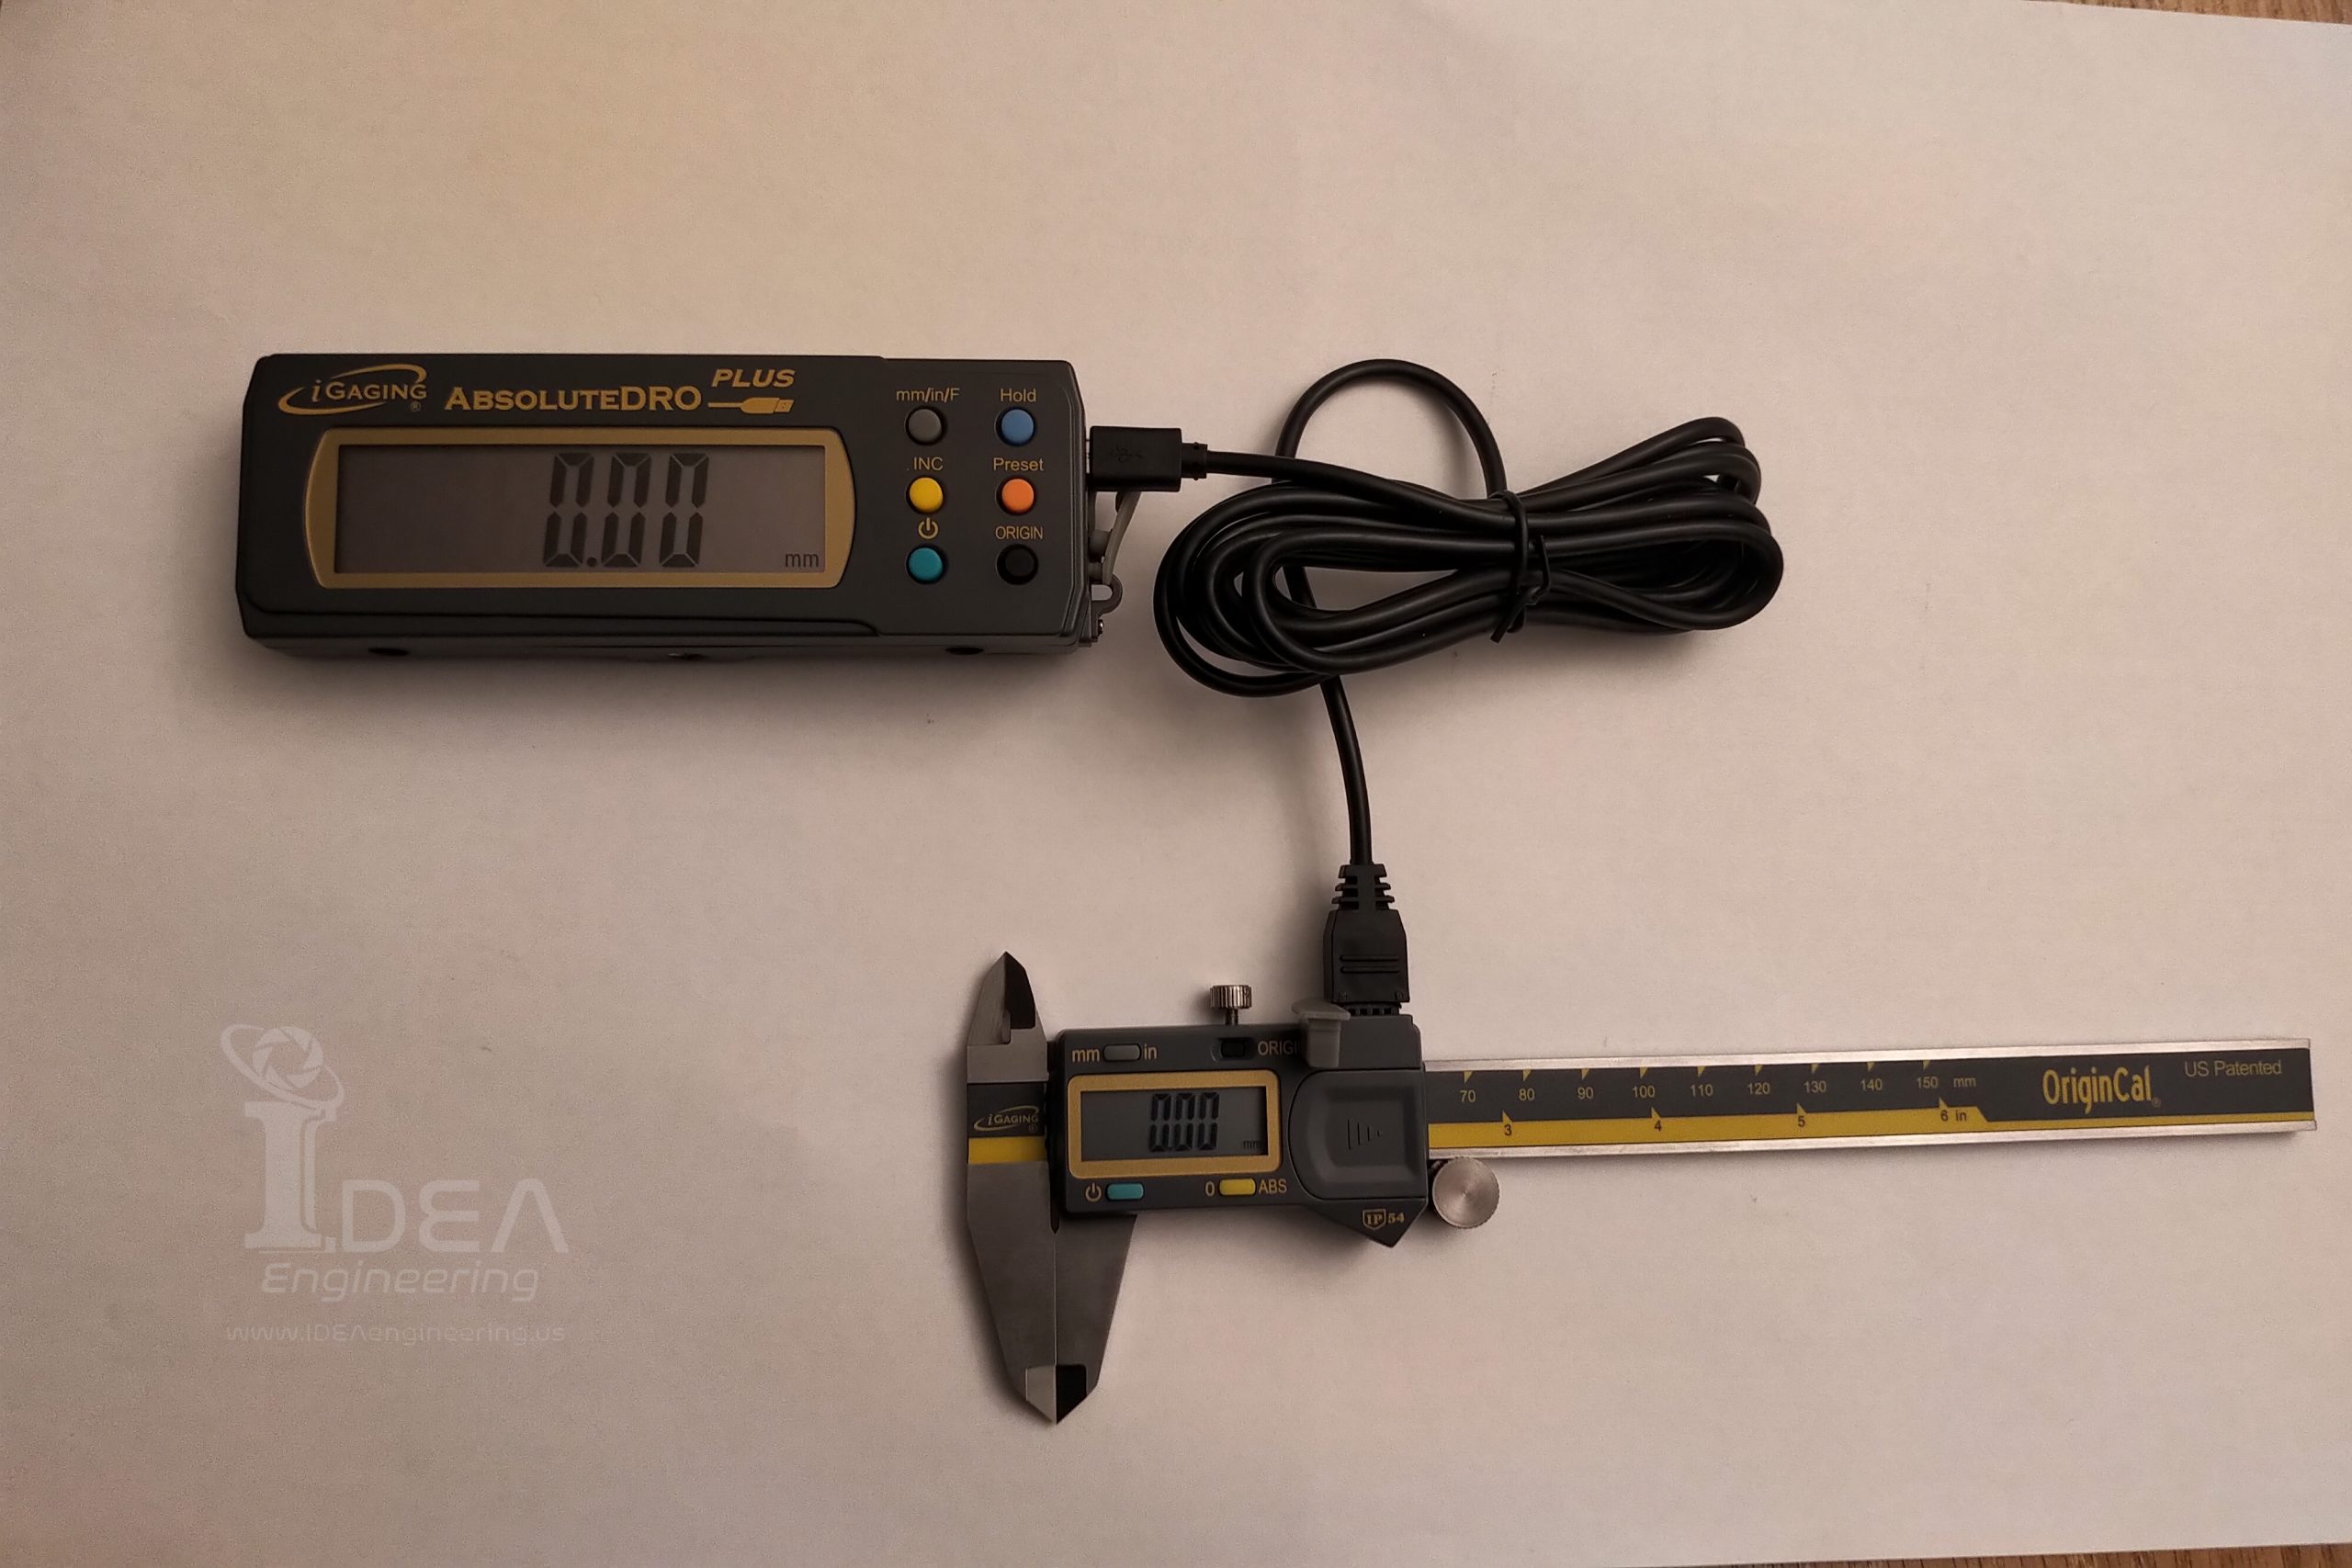 iGaging Absolute DRO Digital Readout for use with absolute origin digital calipers and replacement readout for 35-8XX DRO's